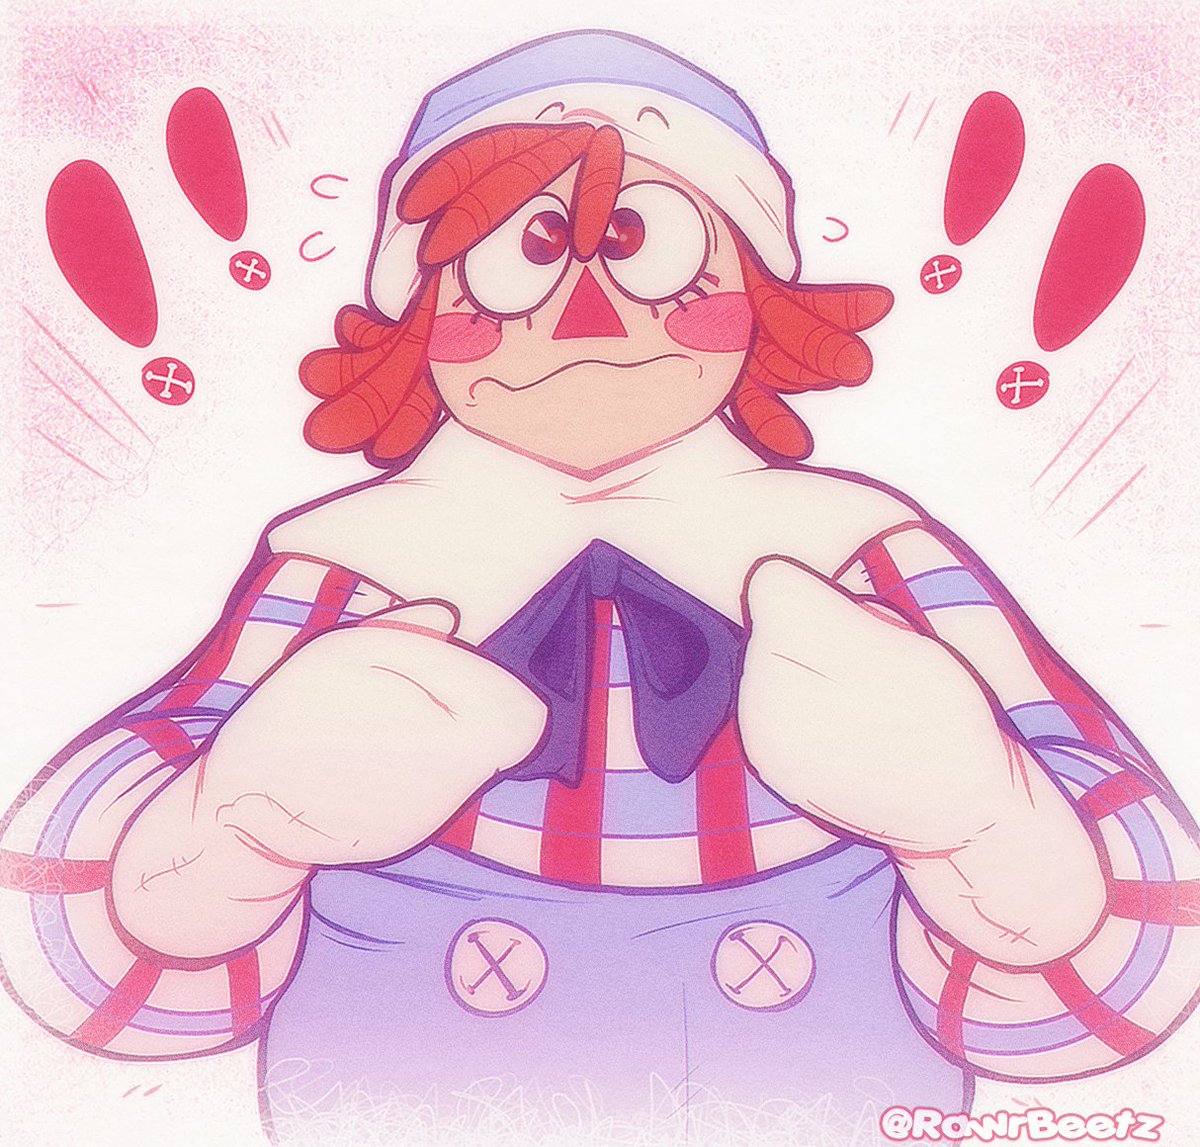 I've been rewatching this movie an embarassing amount since it's such a comfort of mine

Leave him be, he's shy,,
#raggedyann #raggedyannandandy